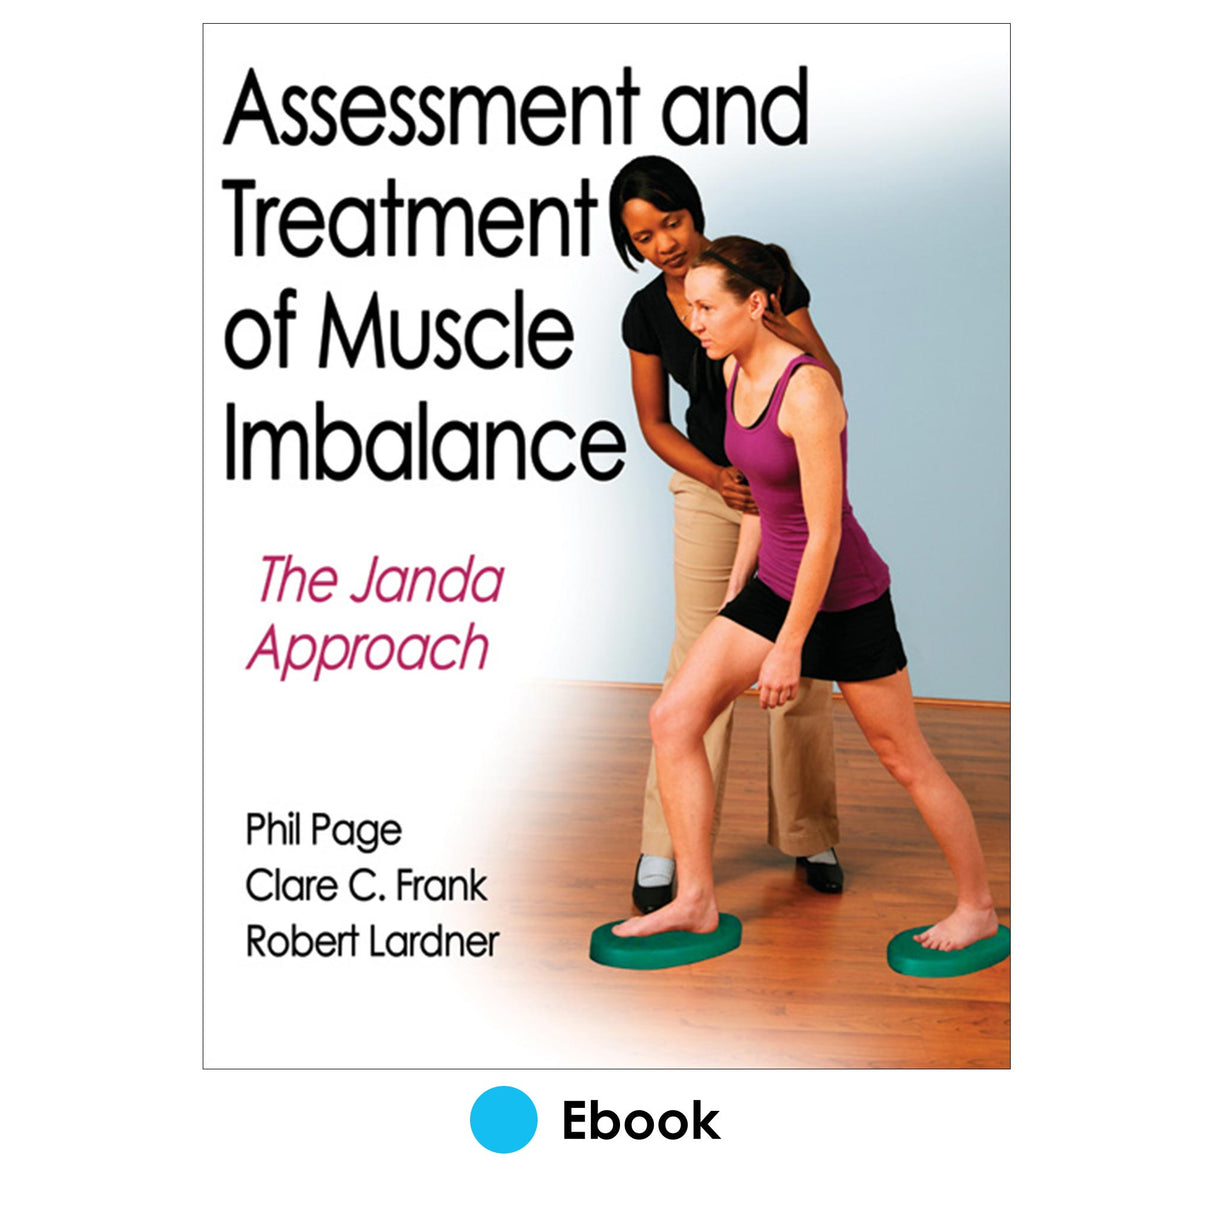 Assessment and Treatment of Muscle Imbalance PDF